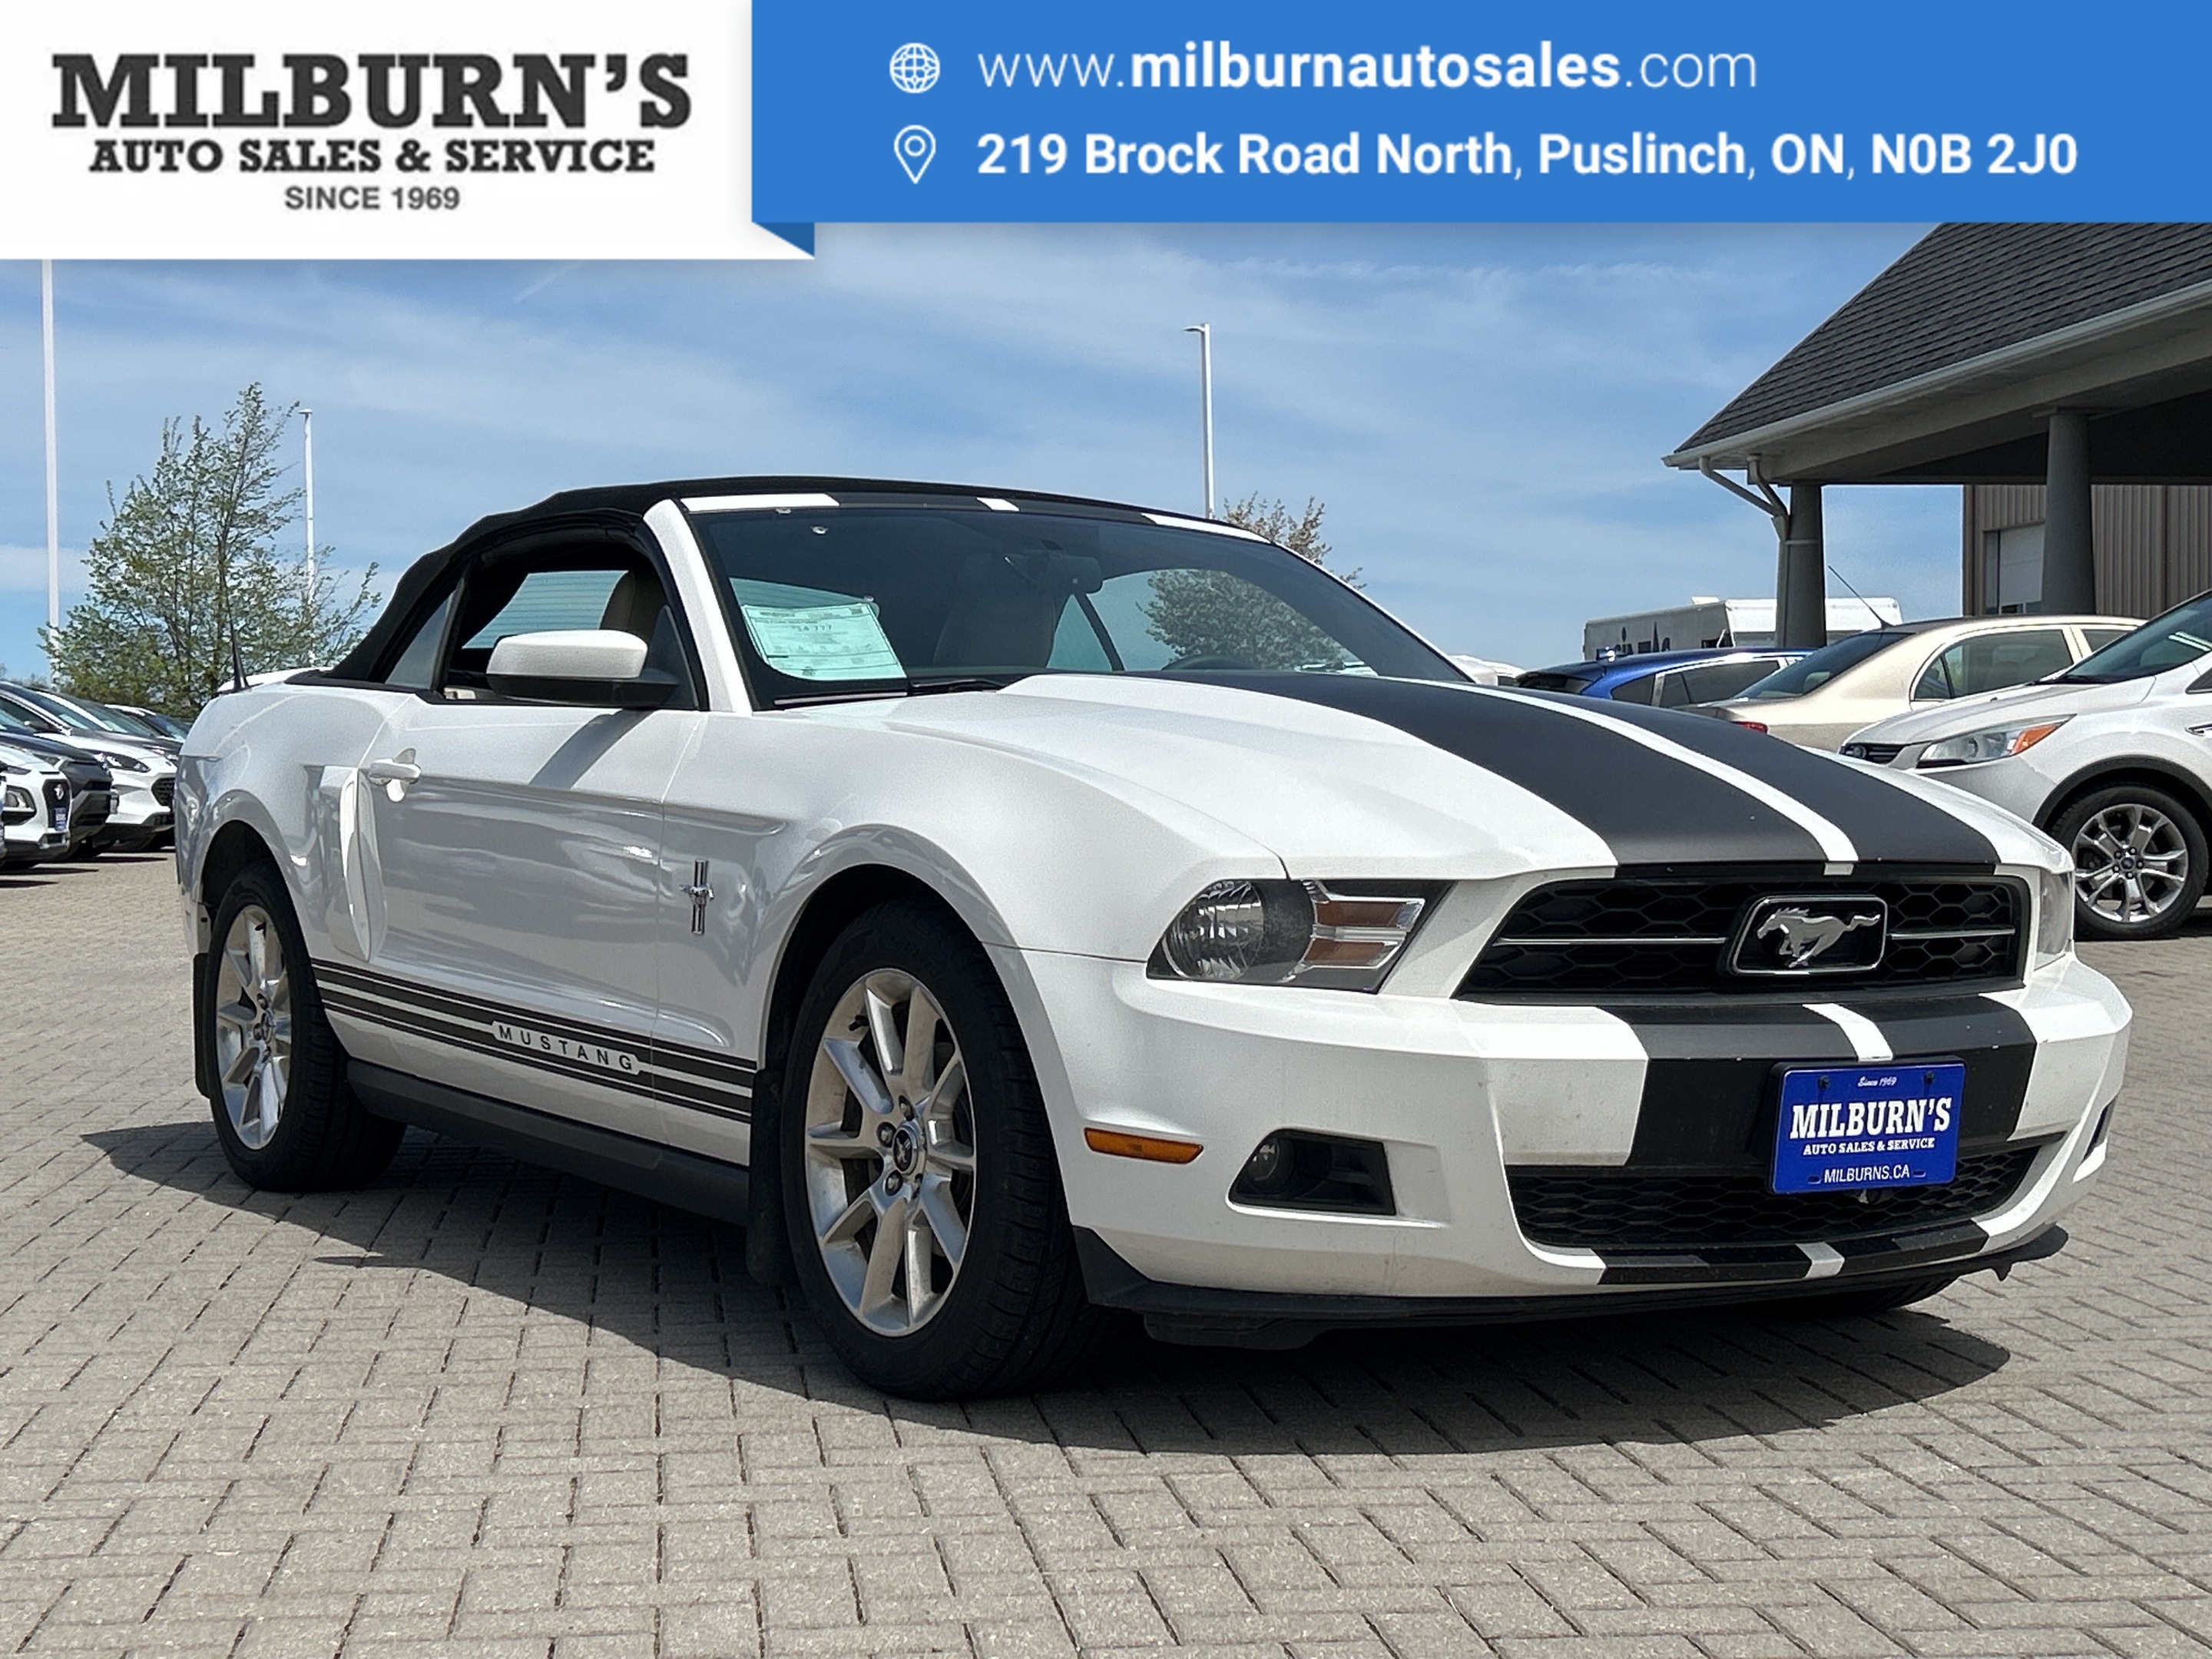 2010 Ford Mustang V6 Convertible | Leather | Heated Seats